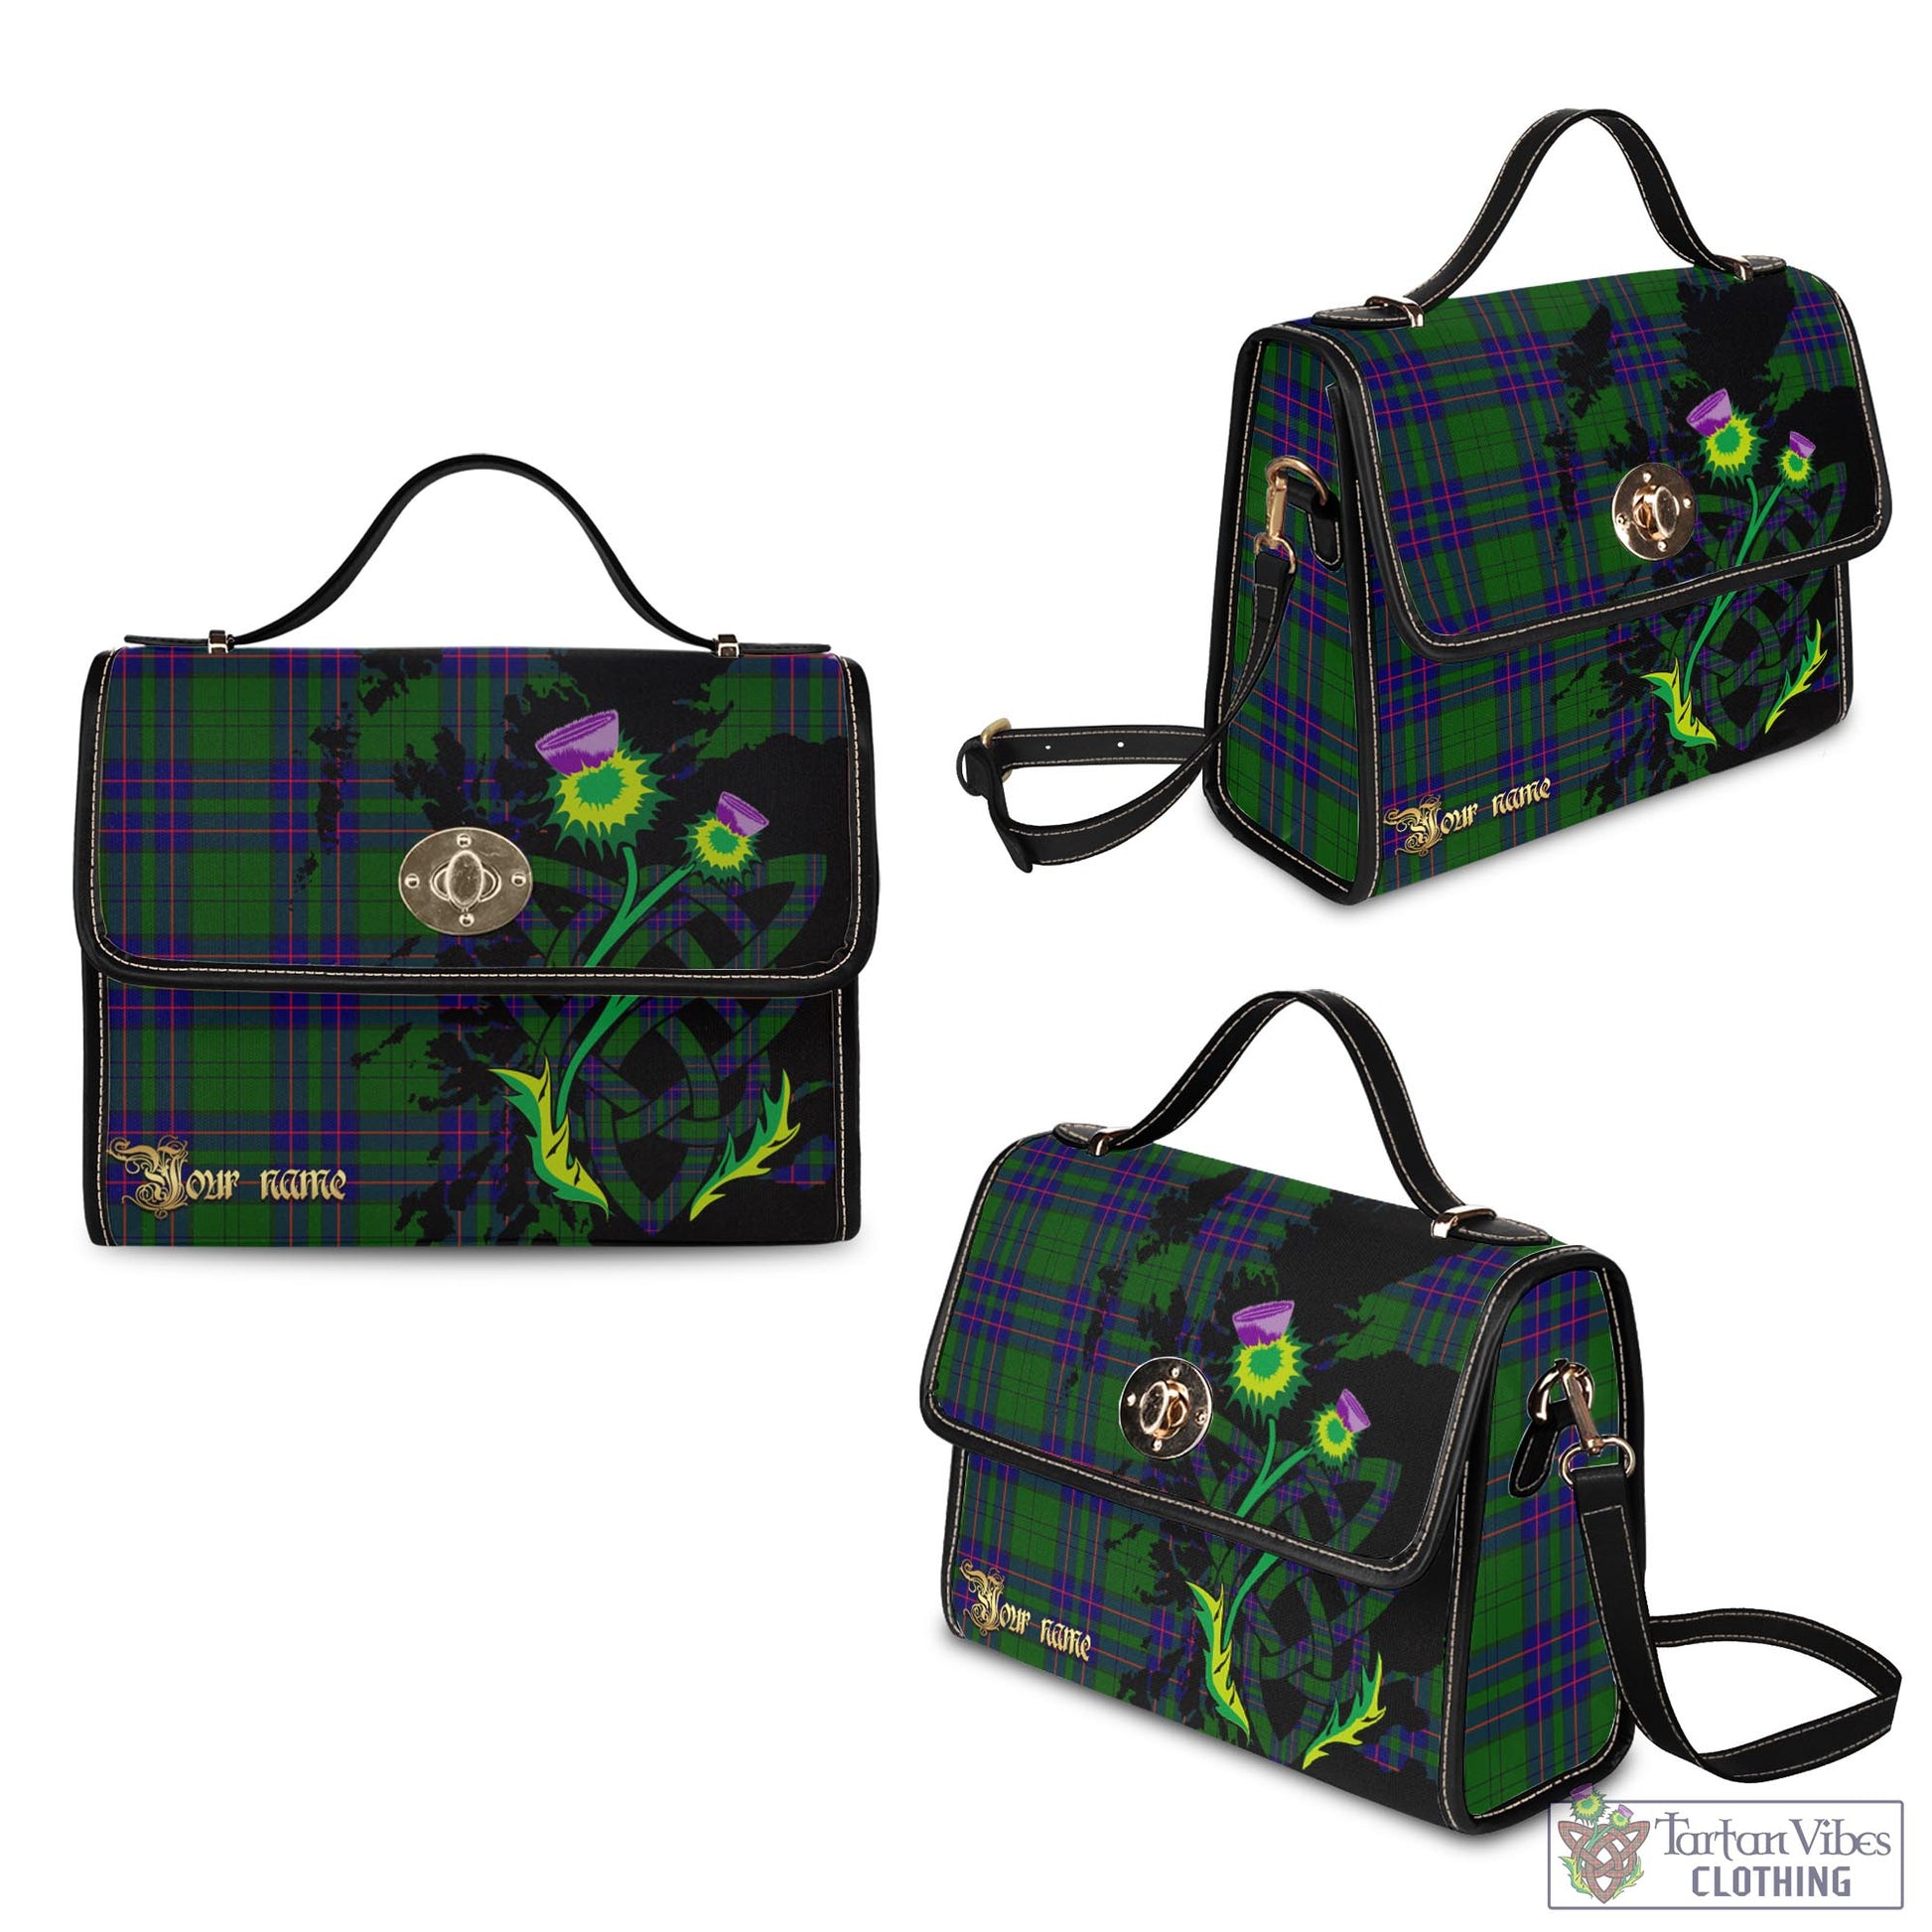 Tartan Vibes Clothing Lockhart Modern Tartan Waterproof Canvas Bag with Scotland Map and Thistle Celtic Accents